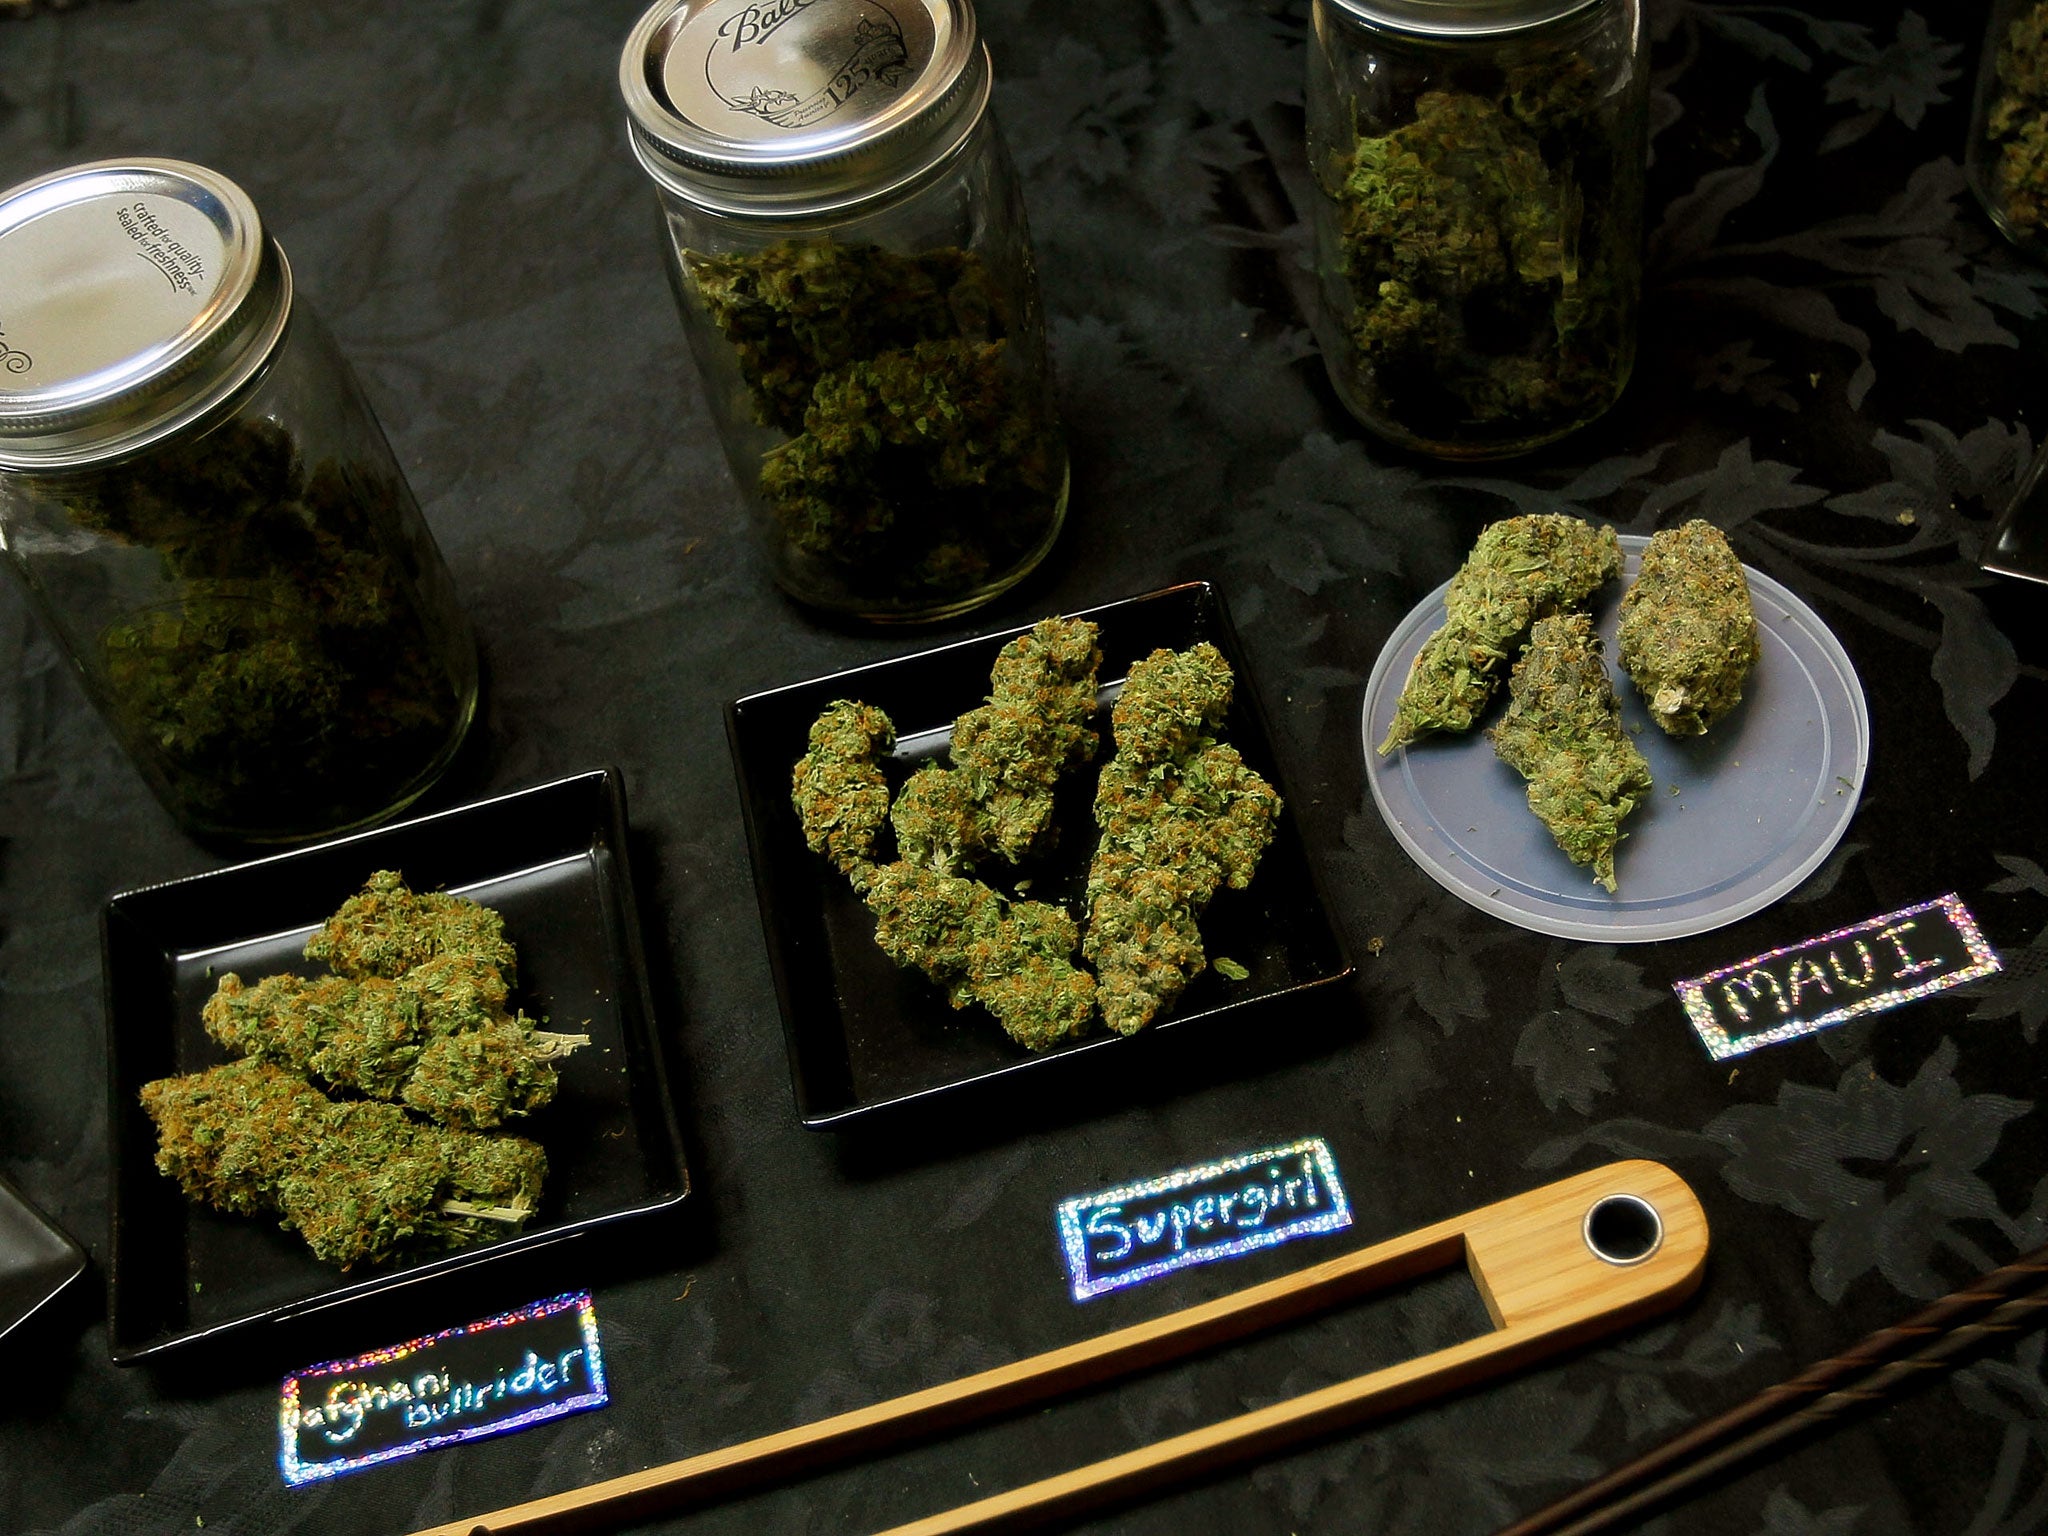 An array of marijuana samples are seen on a table at the Cannabis Crown 2010 expo in Aspen, Colorado. Colorado, one of 14 states to allow use of medical marijuana, has experienced an explosion in marijuana dispensaries, trade shows and related businesses